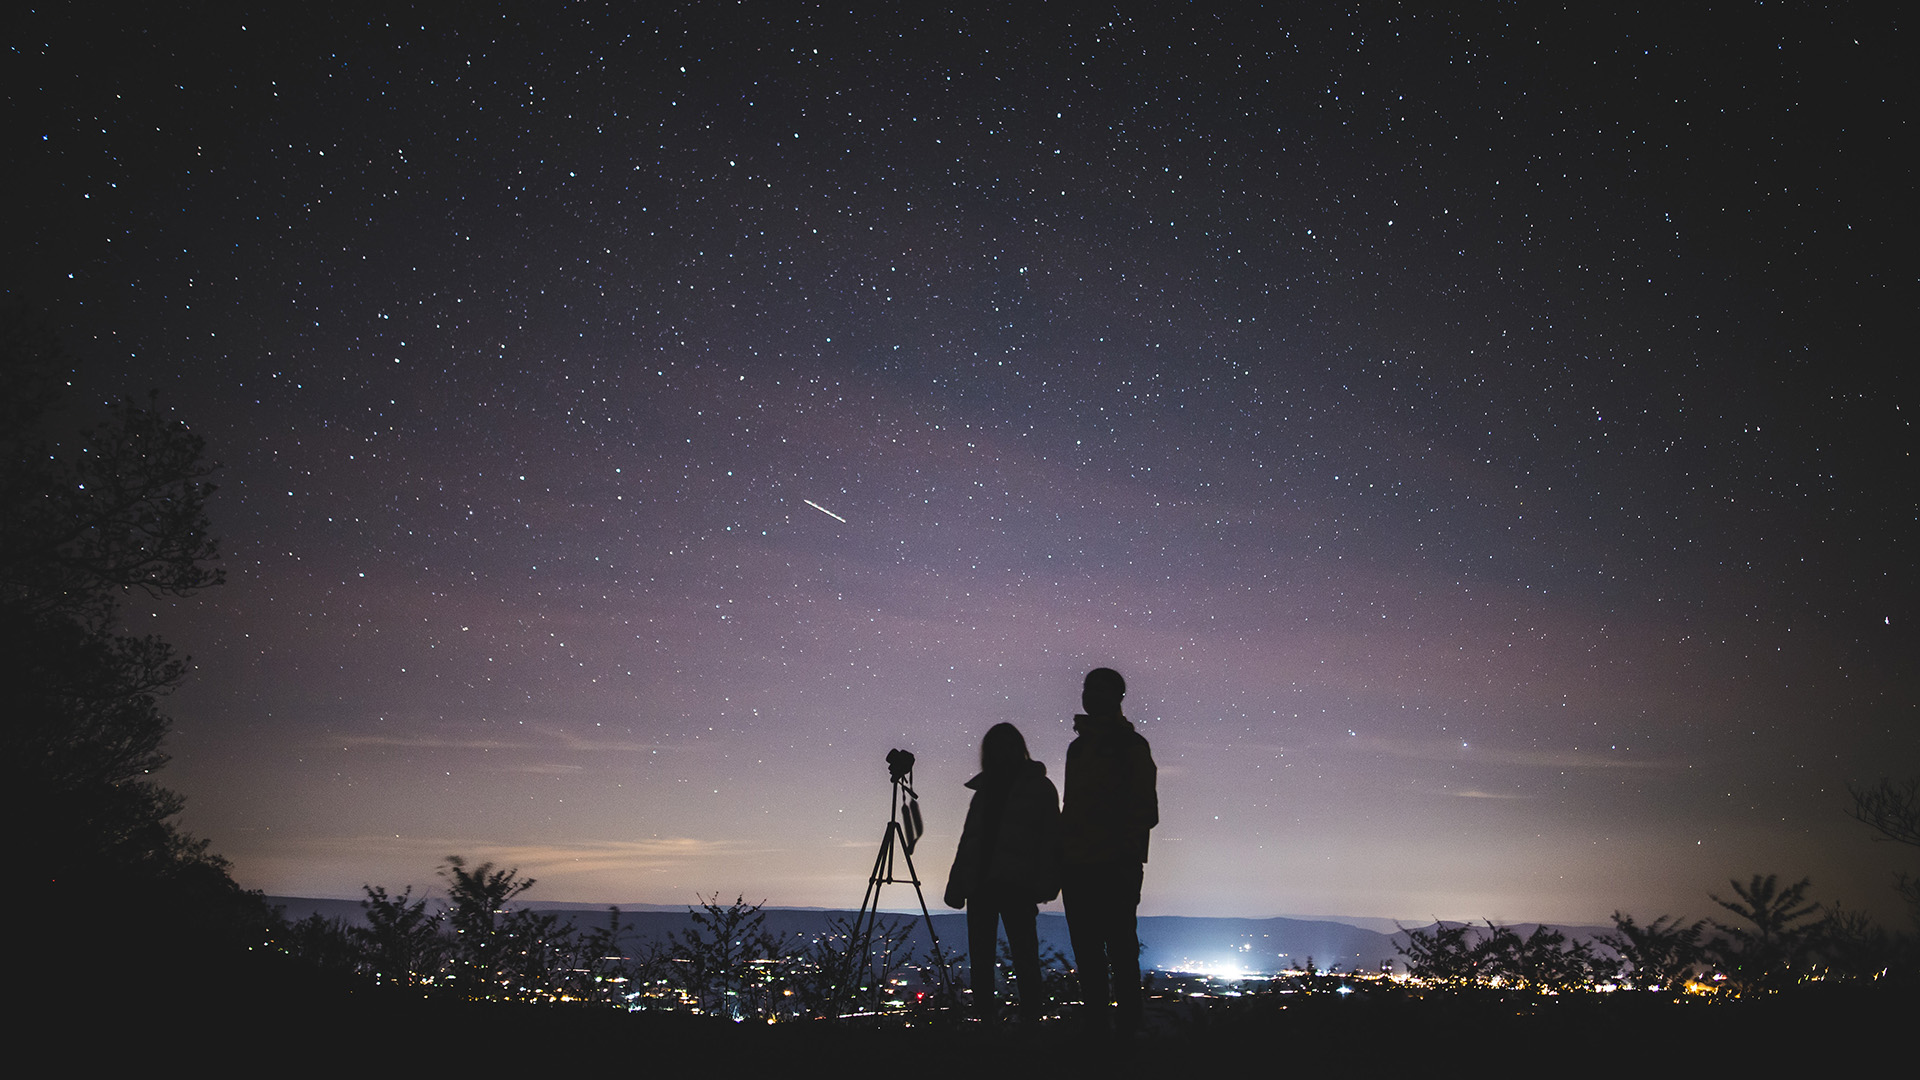 Two people and a camera under a starry sky